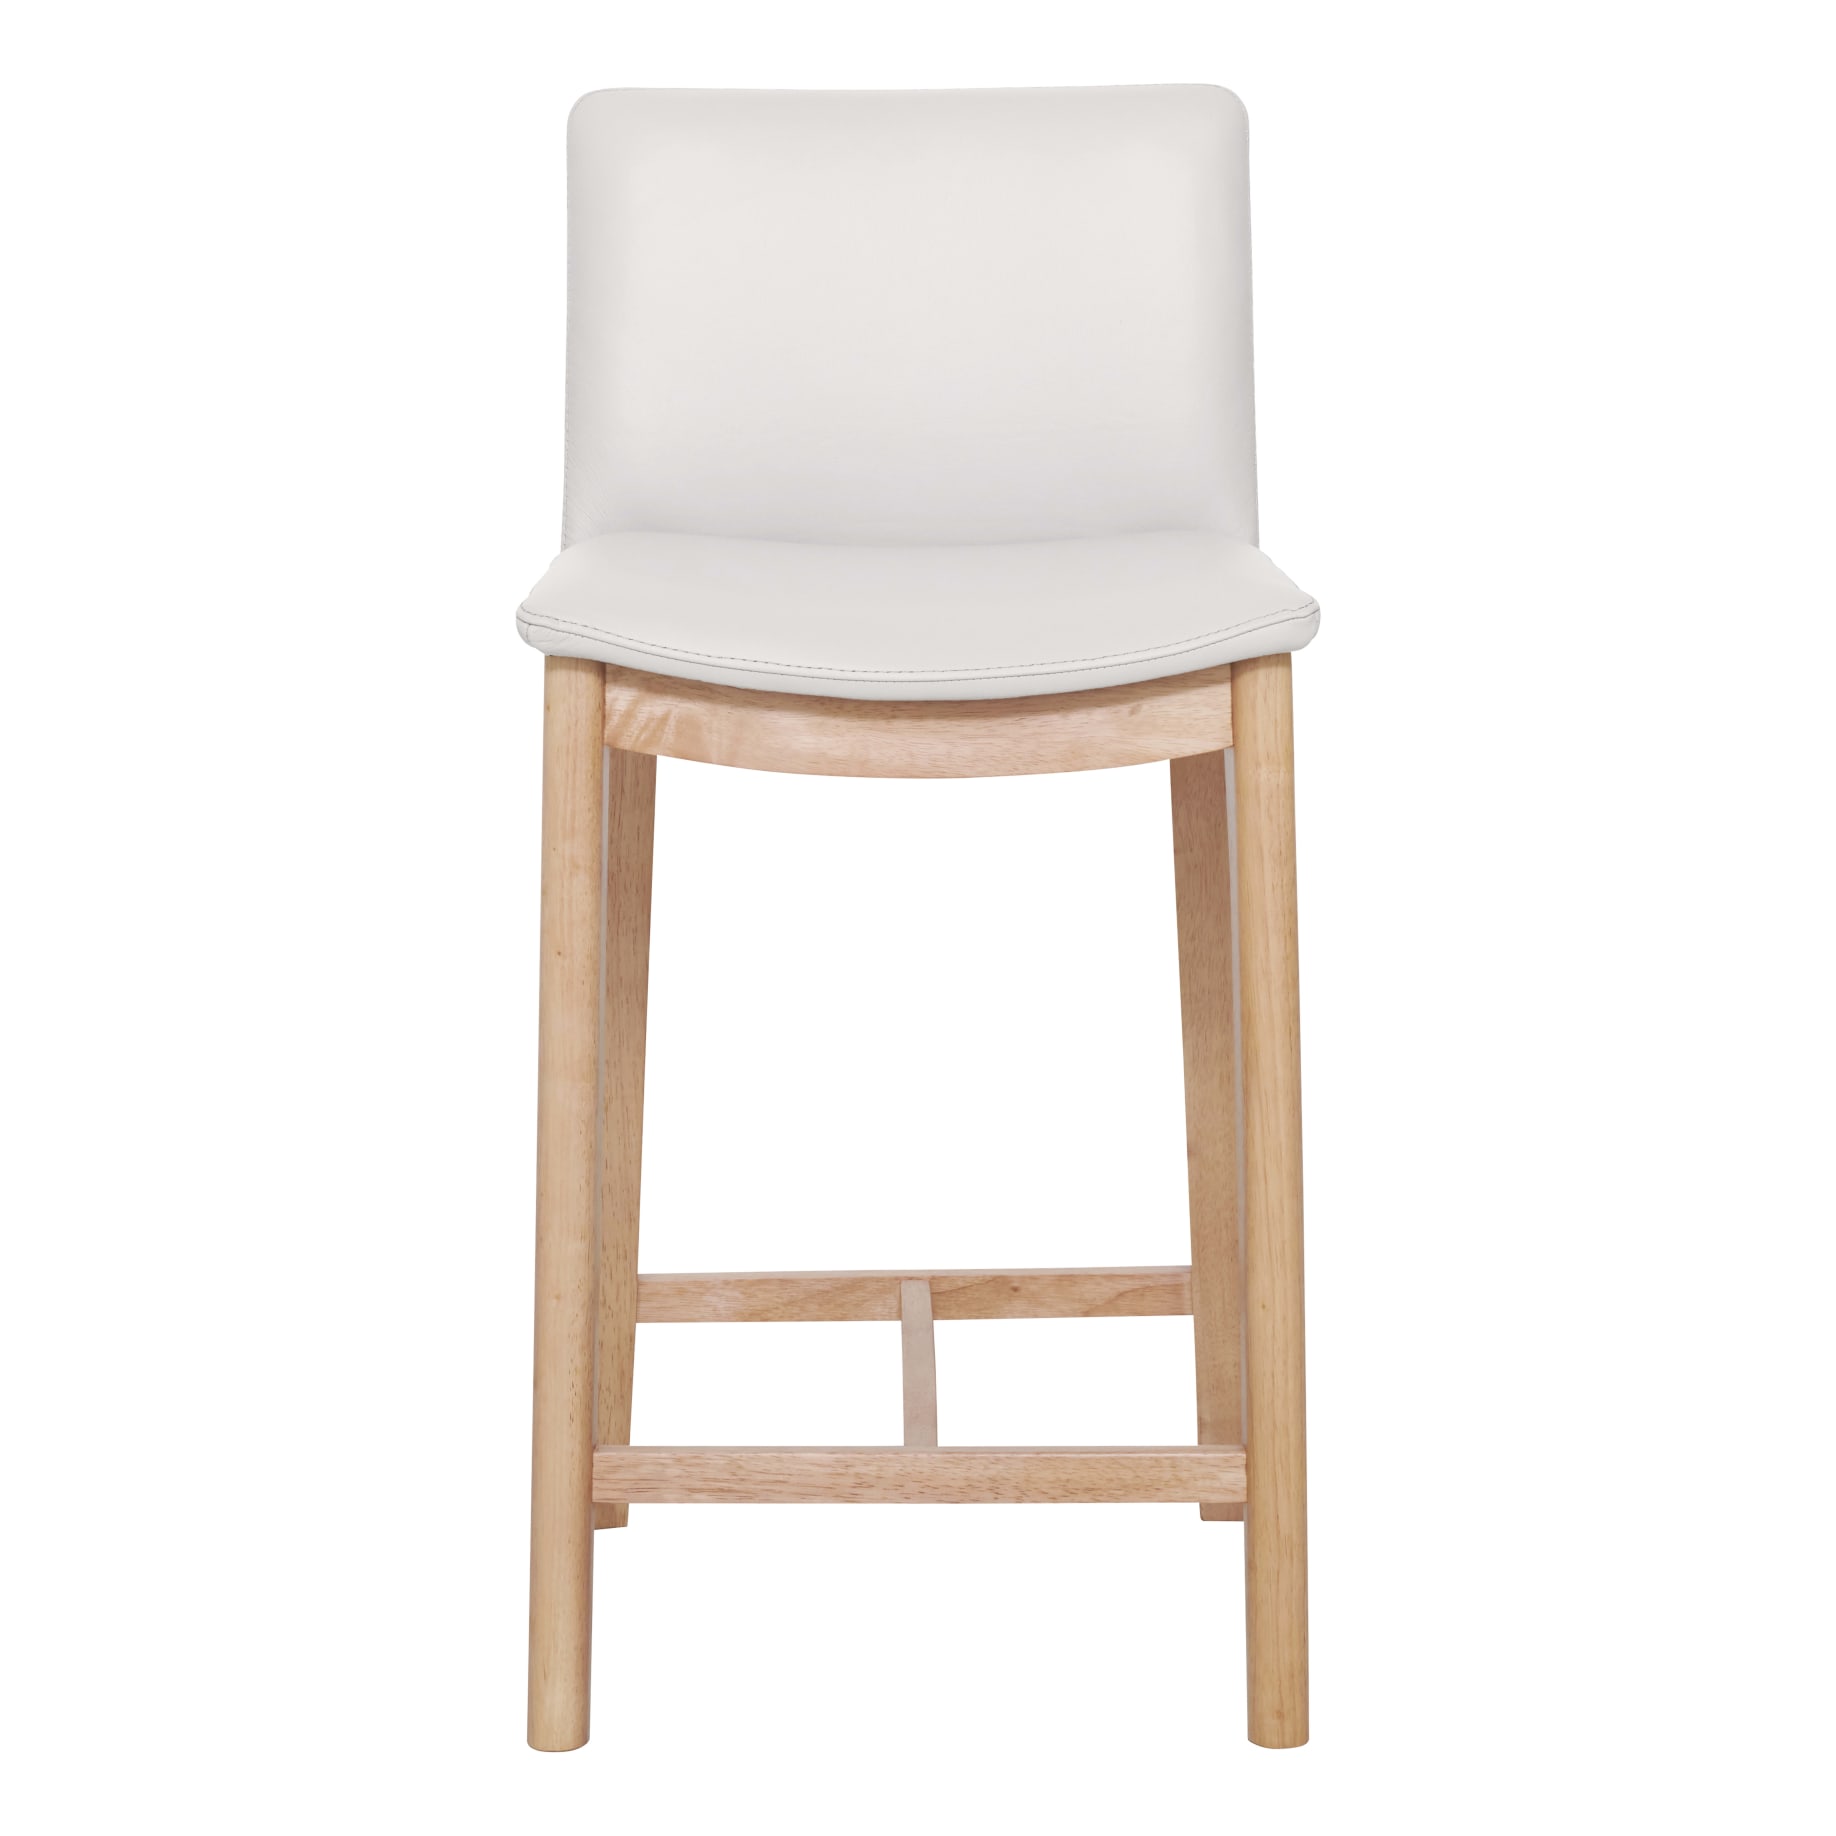 Everest Bar Chair in White Leather / Oak Stain